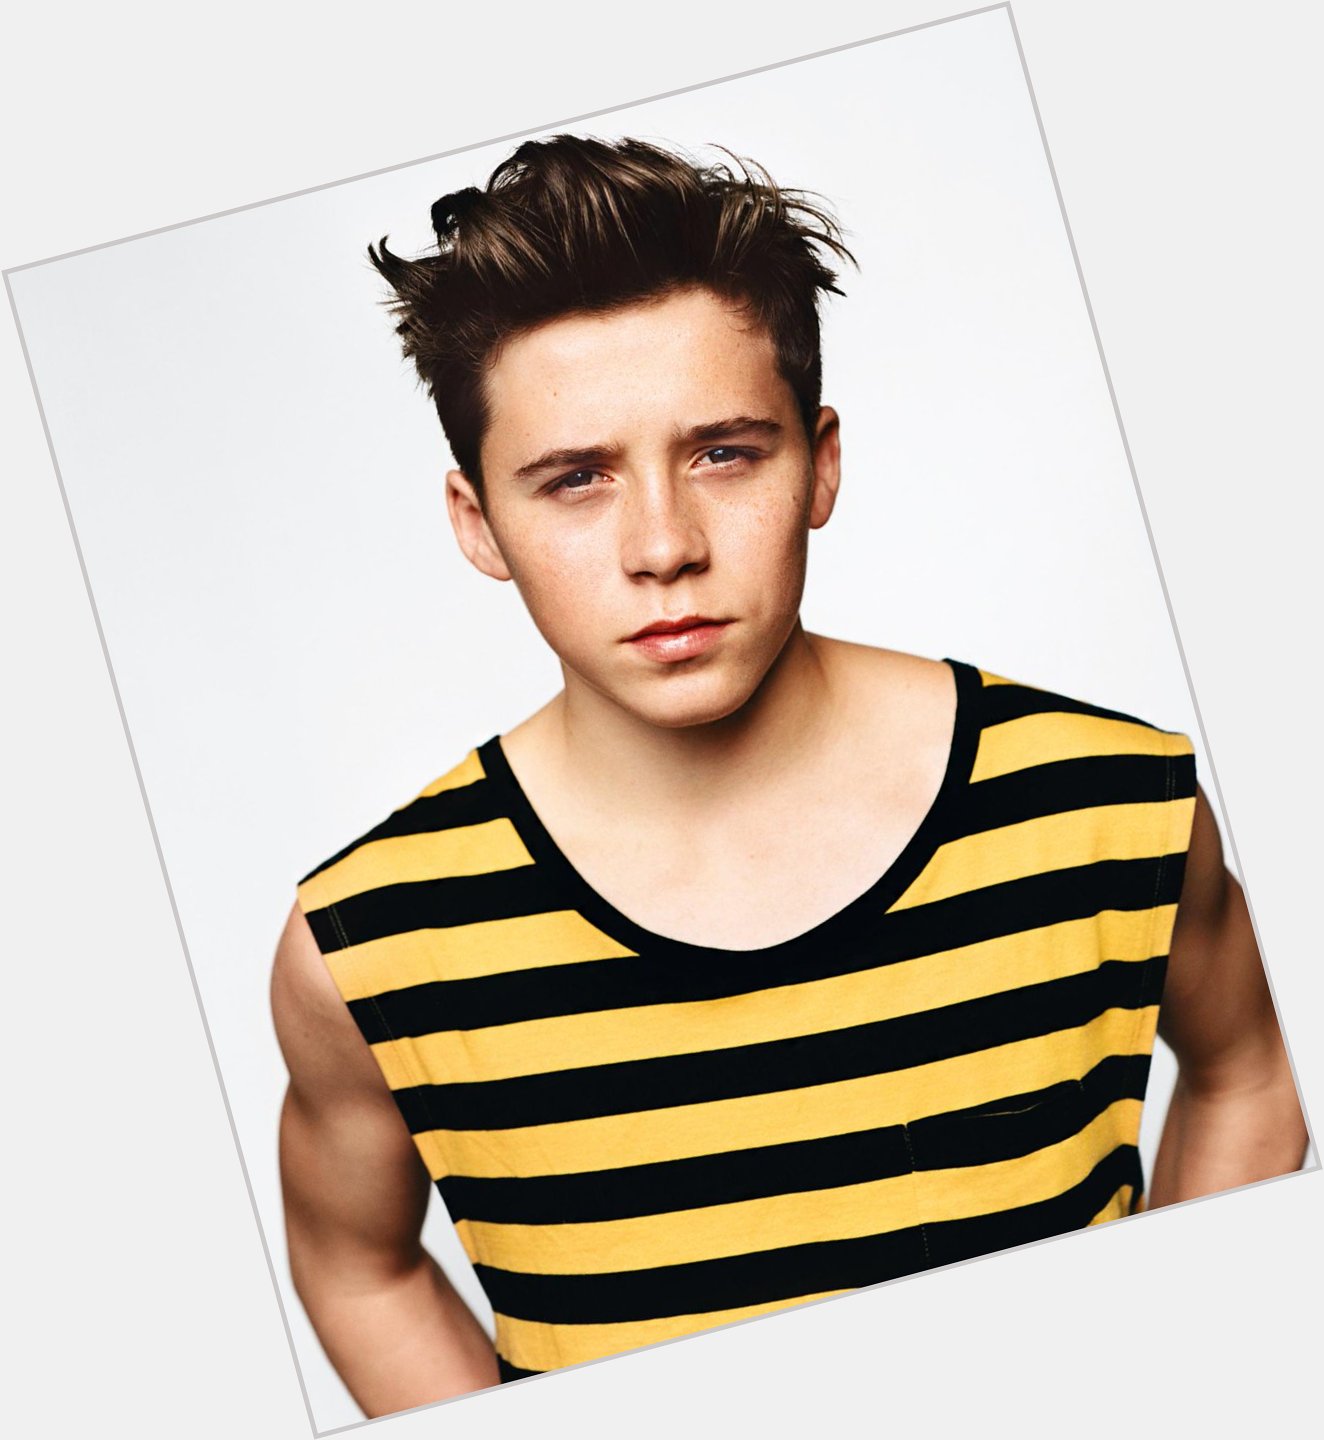 Can you believe this little chap turns 16 today... How time flies! Happy Birthday Brooklyn Beckham! 